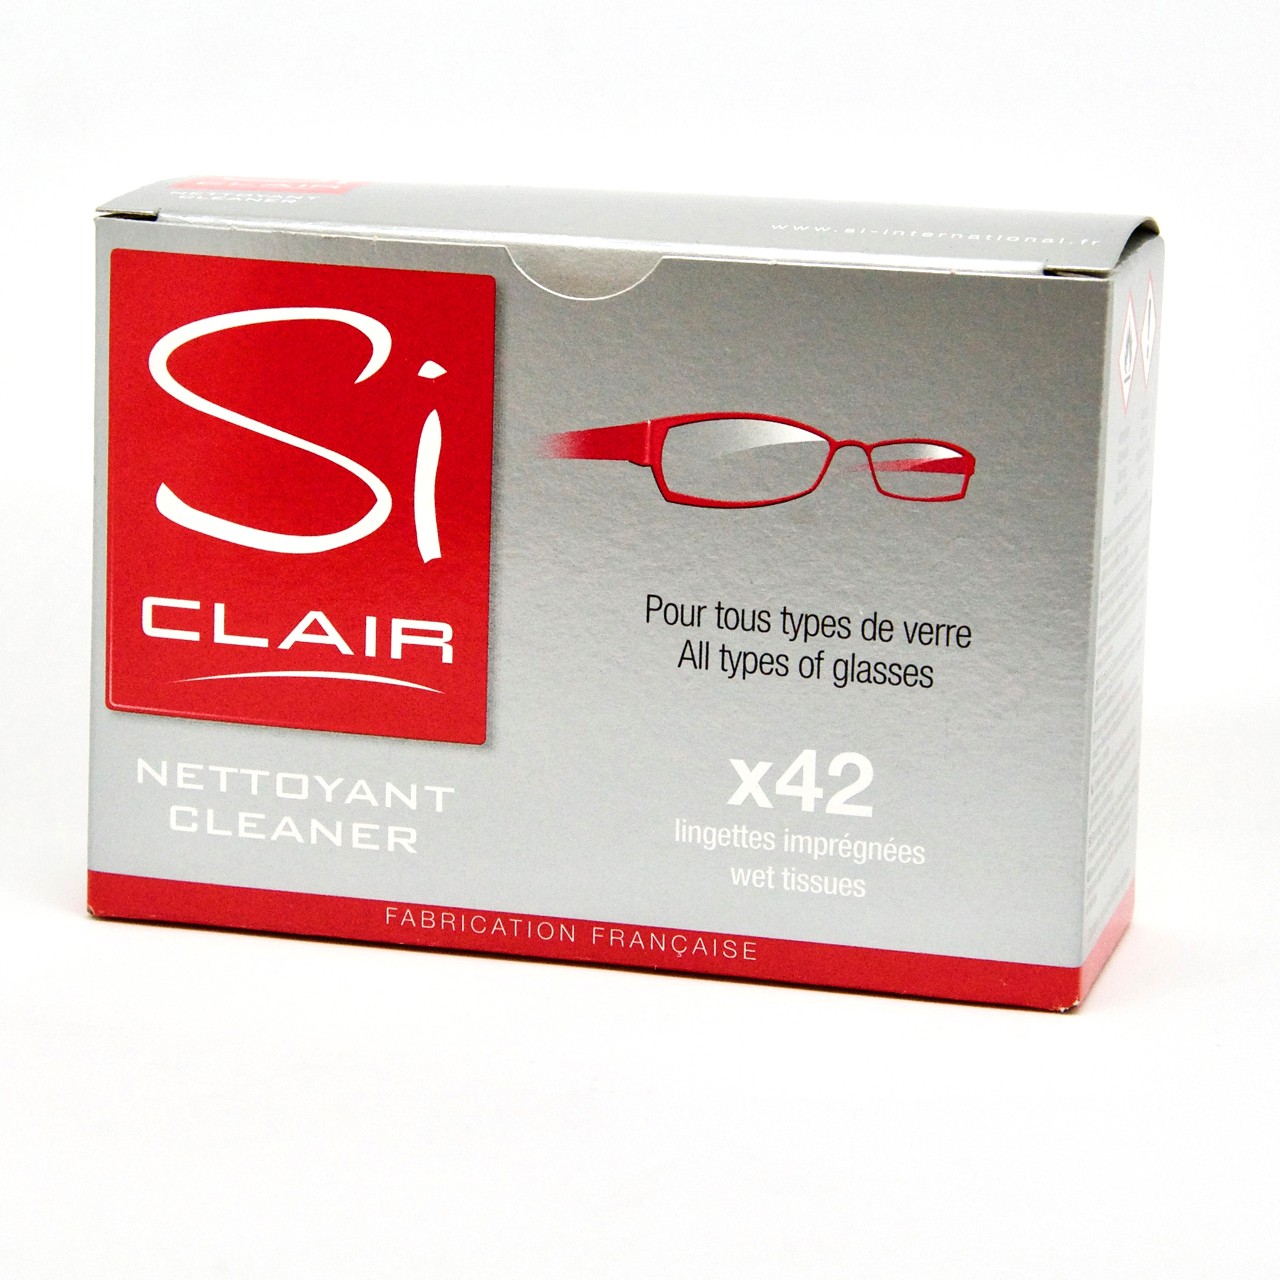 Spray nettoyant lunettes - SI CLAIR 35ml rechargeable